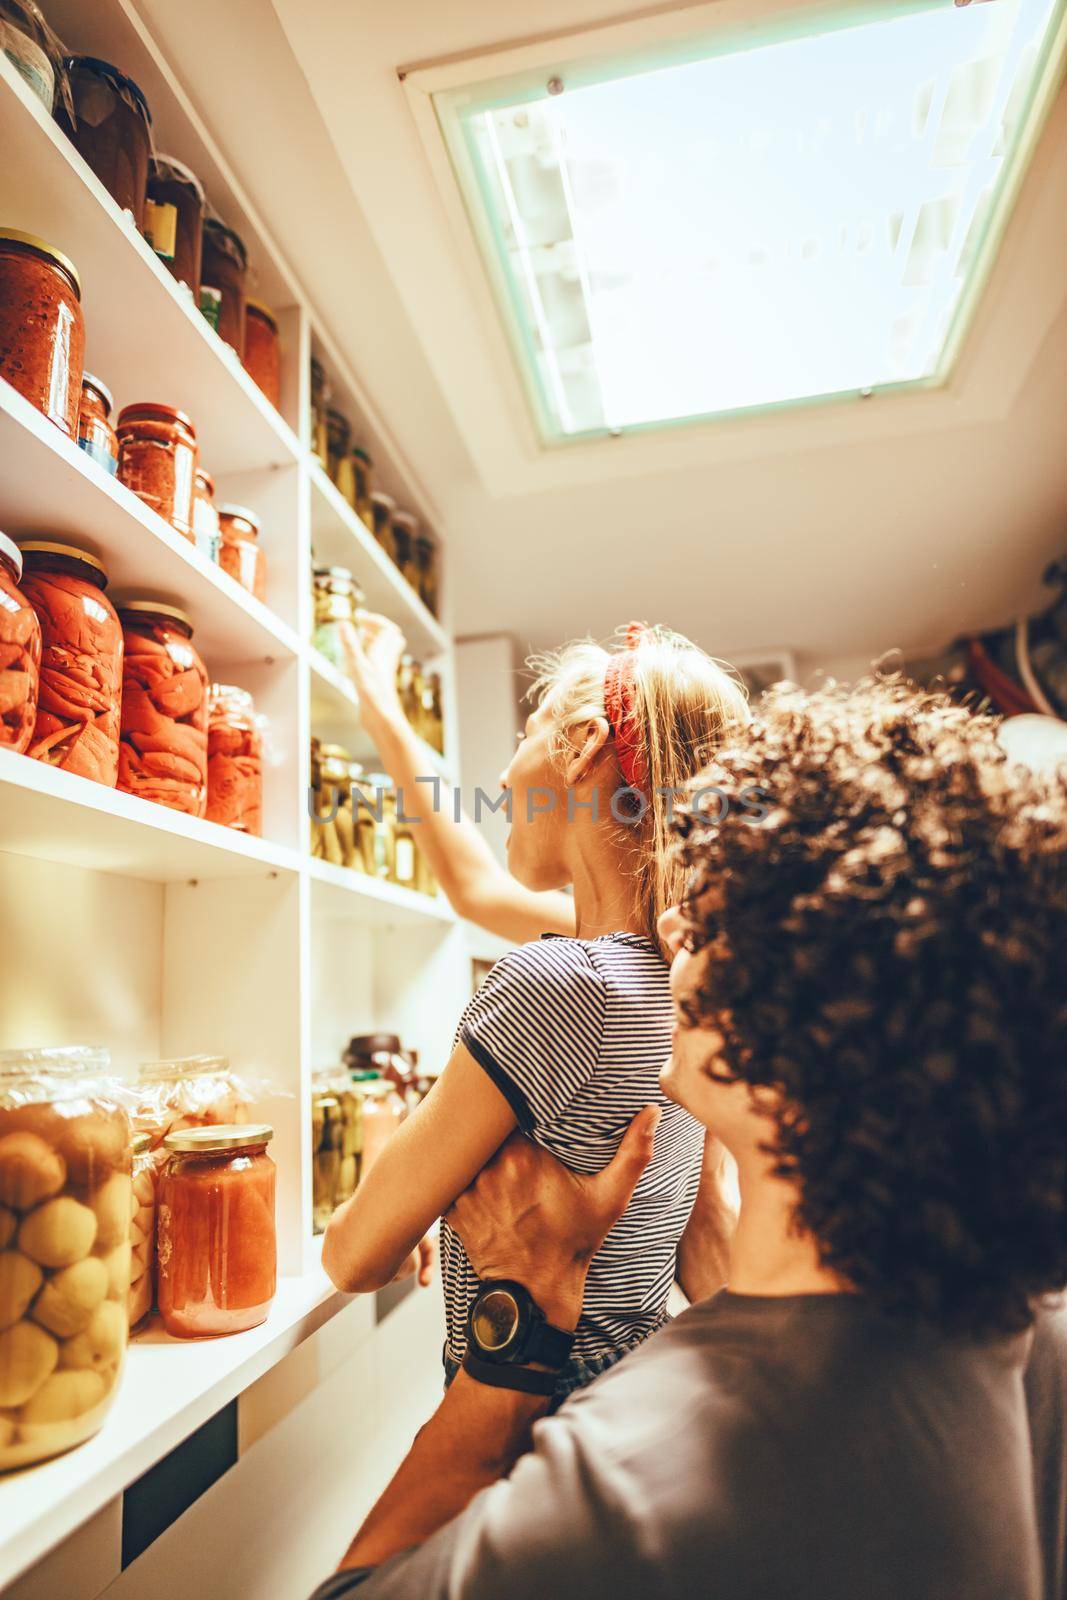 A happy family takes jars with pickled vegetables from the pantry shelf. His father is holding high.